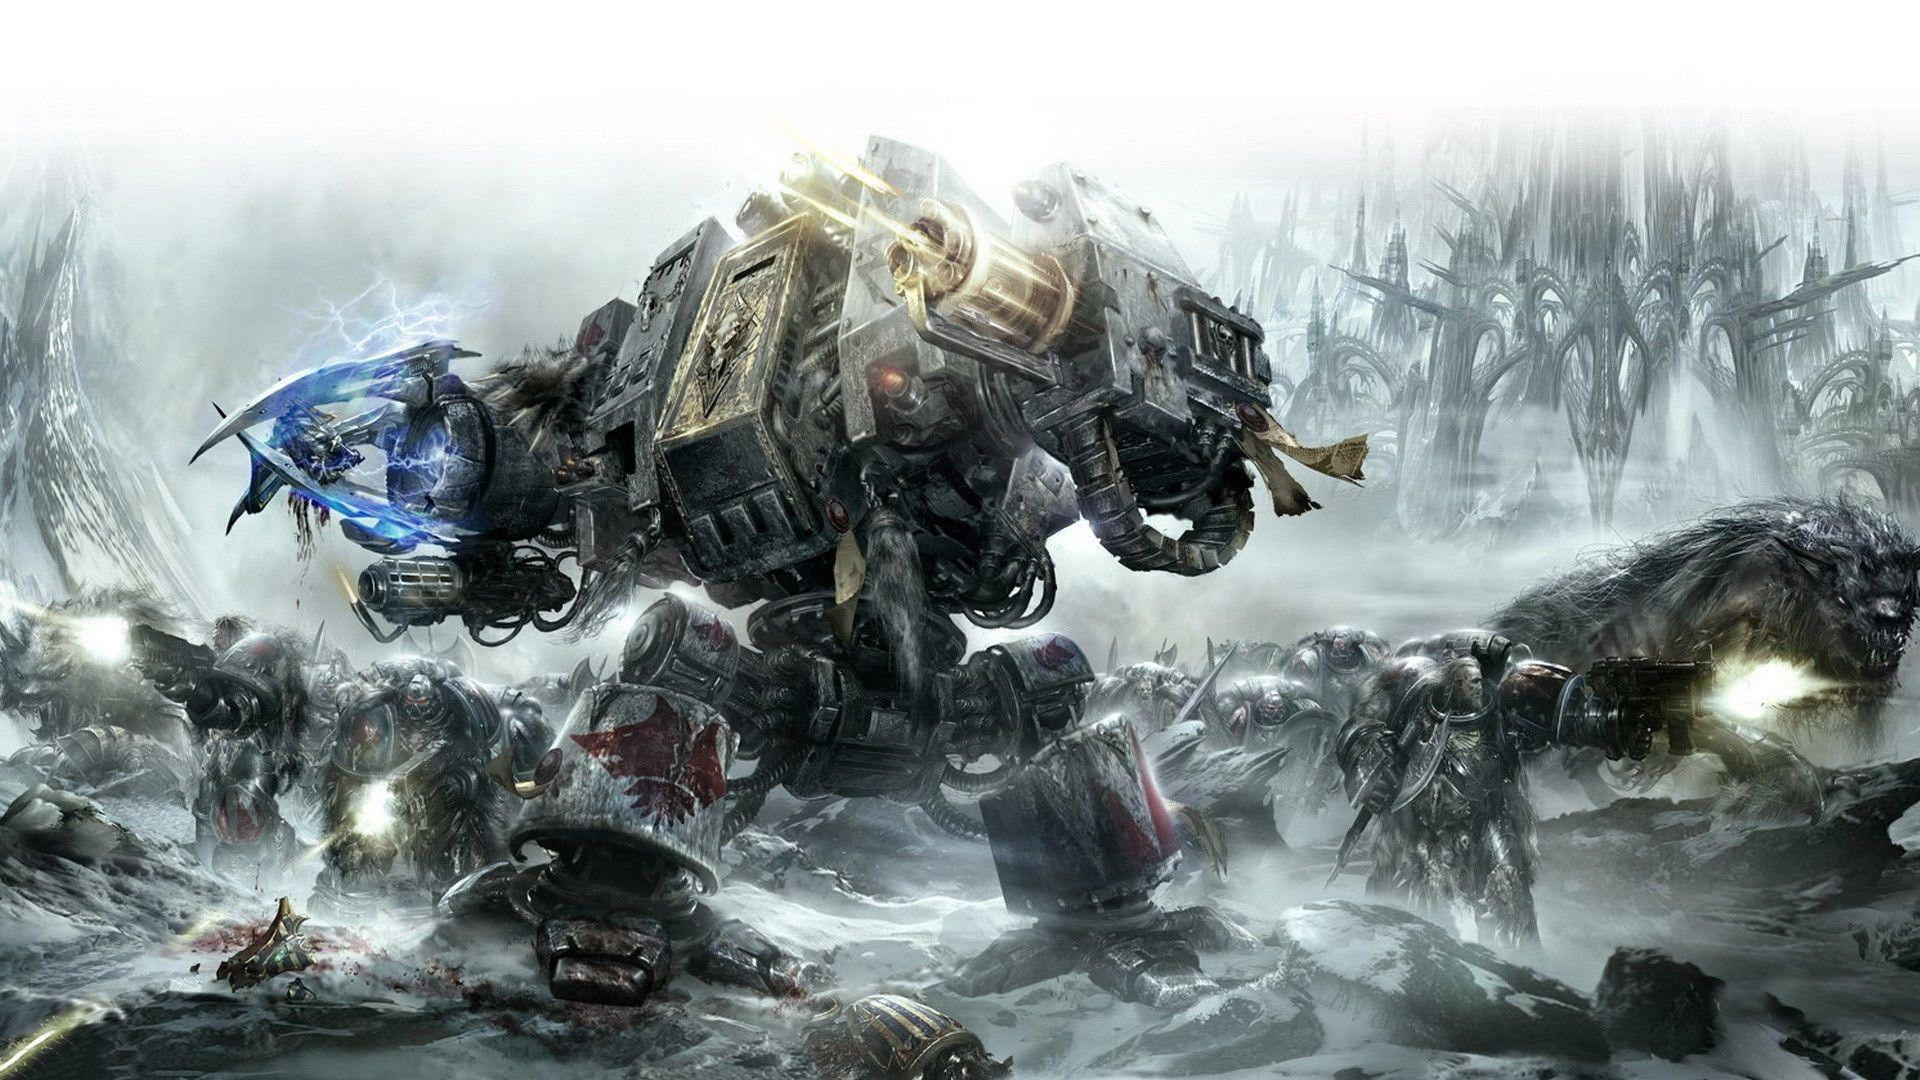 General 1920x1080 Warhammer Warhammer 40,000 science fiction space marines power armor Dreadnought space wolves bolter Bjorn the Fell-Handed video games video game art